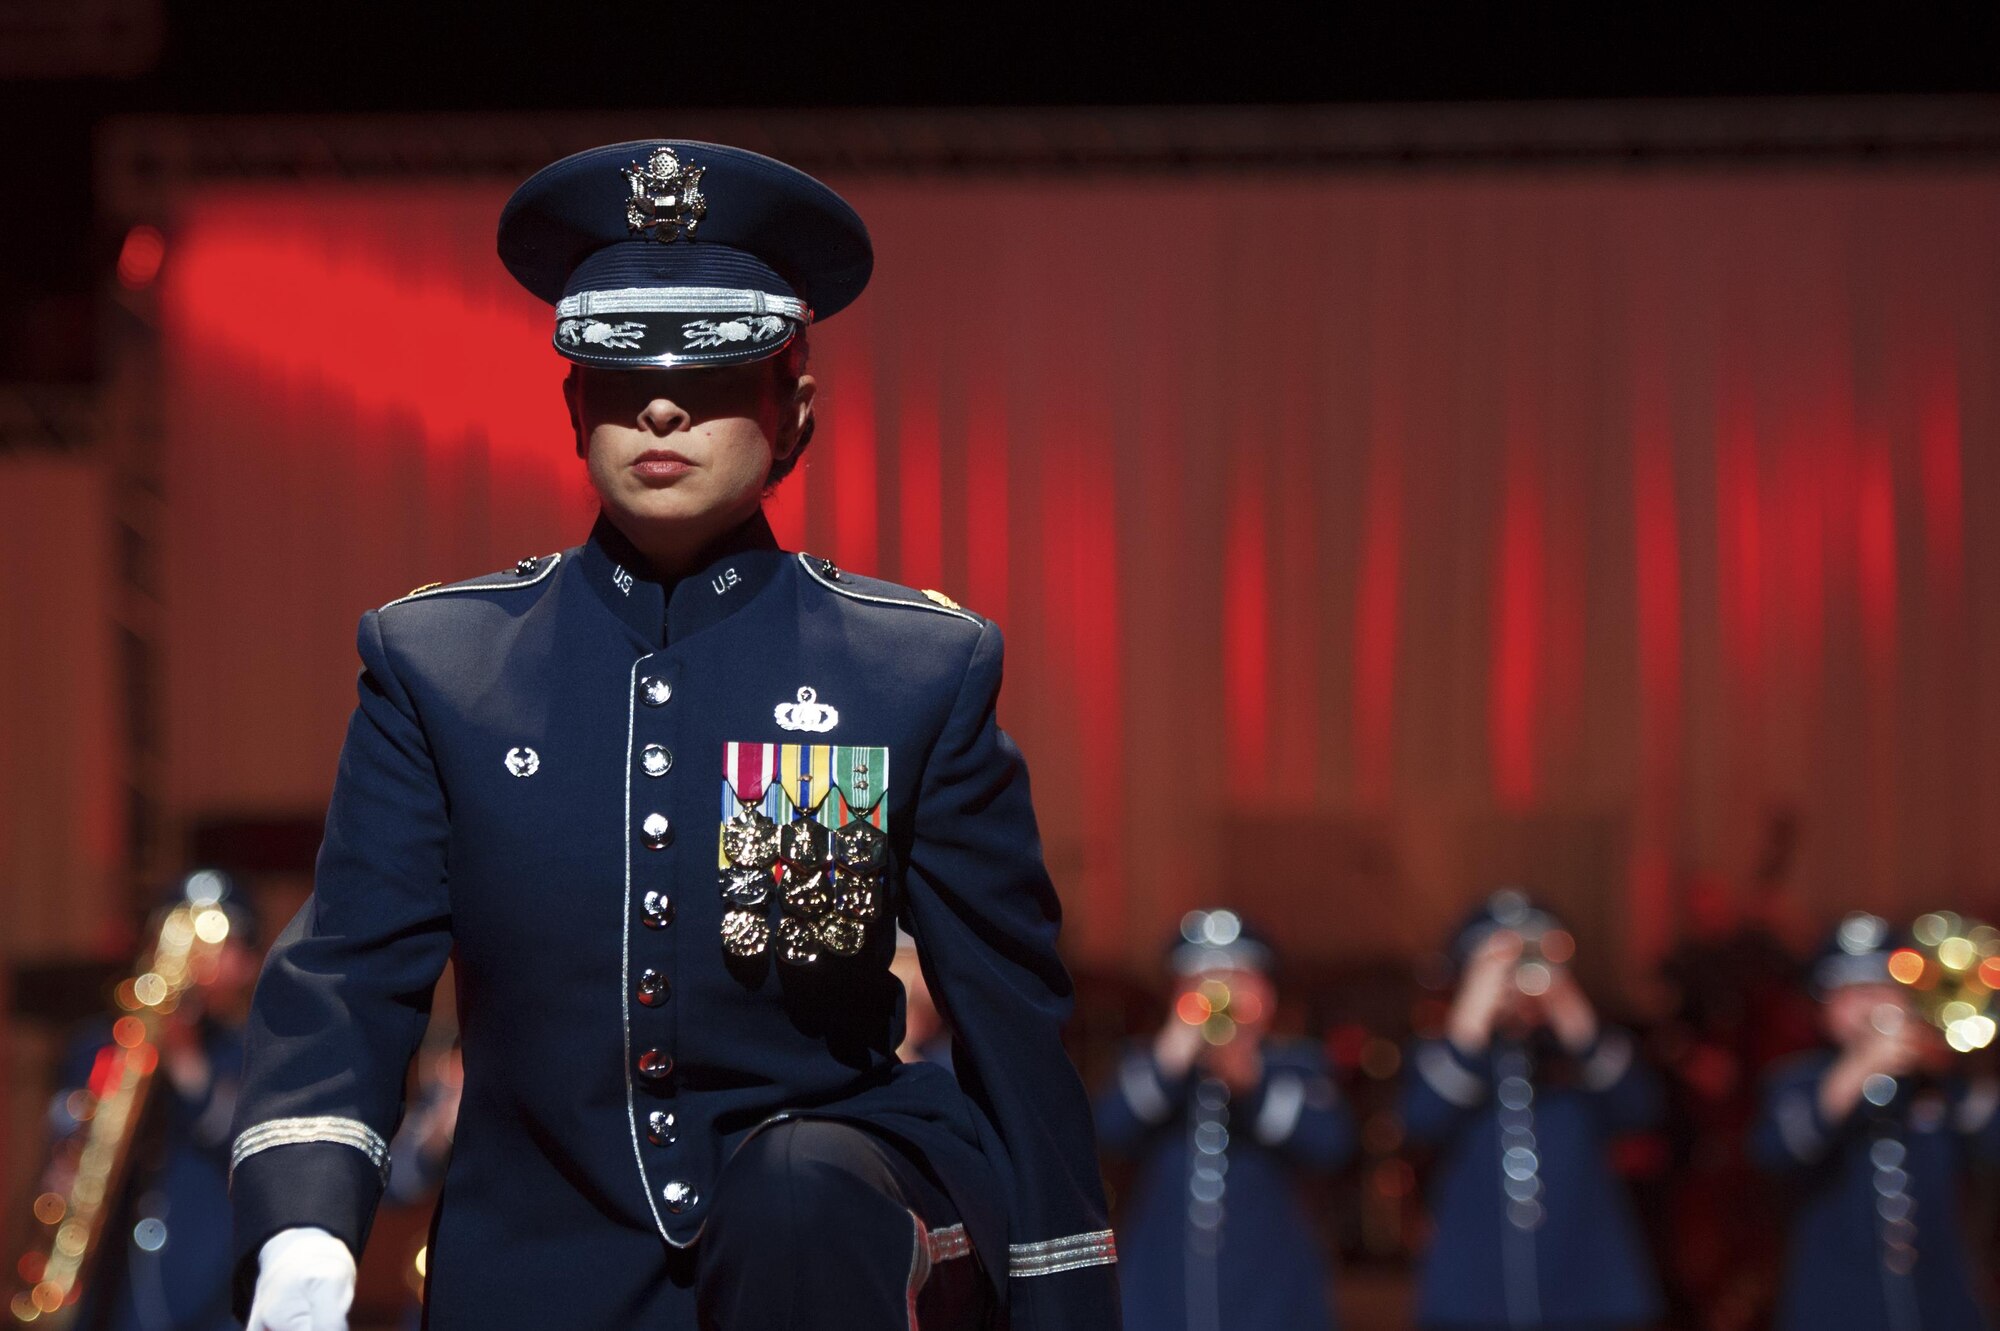 Maj. Cristina Moore Urrutia, the commander and conductor of the U.S. Air Force Band of the Pacific, walks to a podium during the Japan Self-Defense Force Marching Festival at the Nippon Budokan Arena in Tokyo, Japan, Nov. 13, 2015. The three-day festival featured performances from 13 different bands, representing three nations -- the U.S., Japan and South Korea. (U.S. Air Force photo/Airman 1st Class Delano Scott)